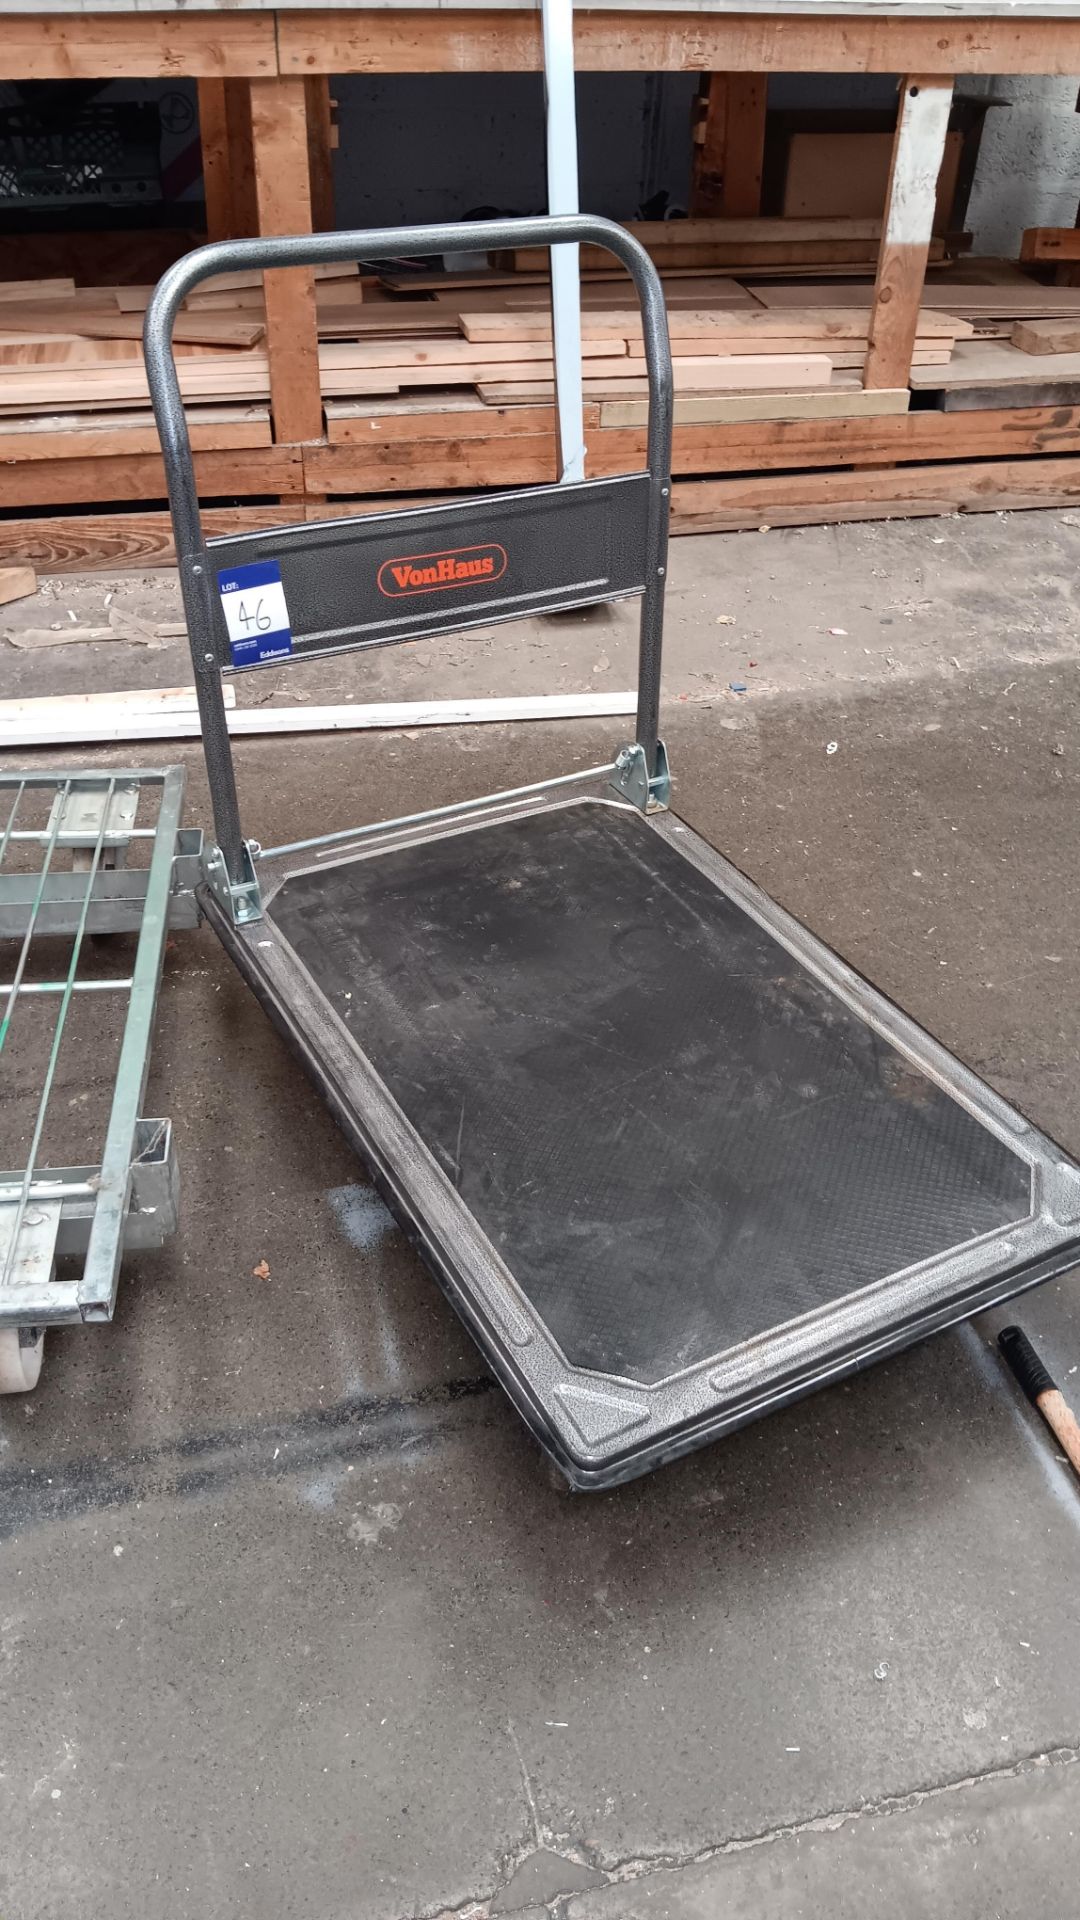 VonHaus 300kg capacity folding flatbed trolley and mesh warehouse dolly – Located in Unit 3 - Image 2 of 3